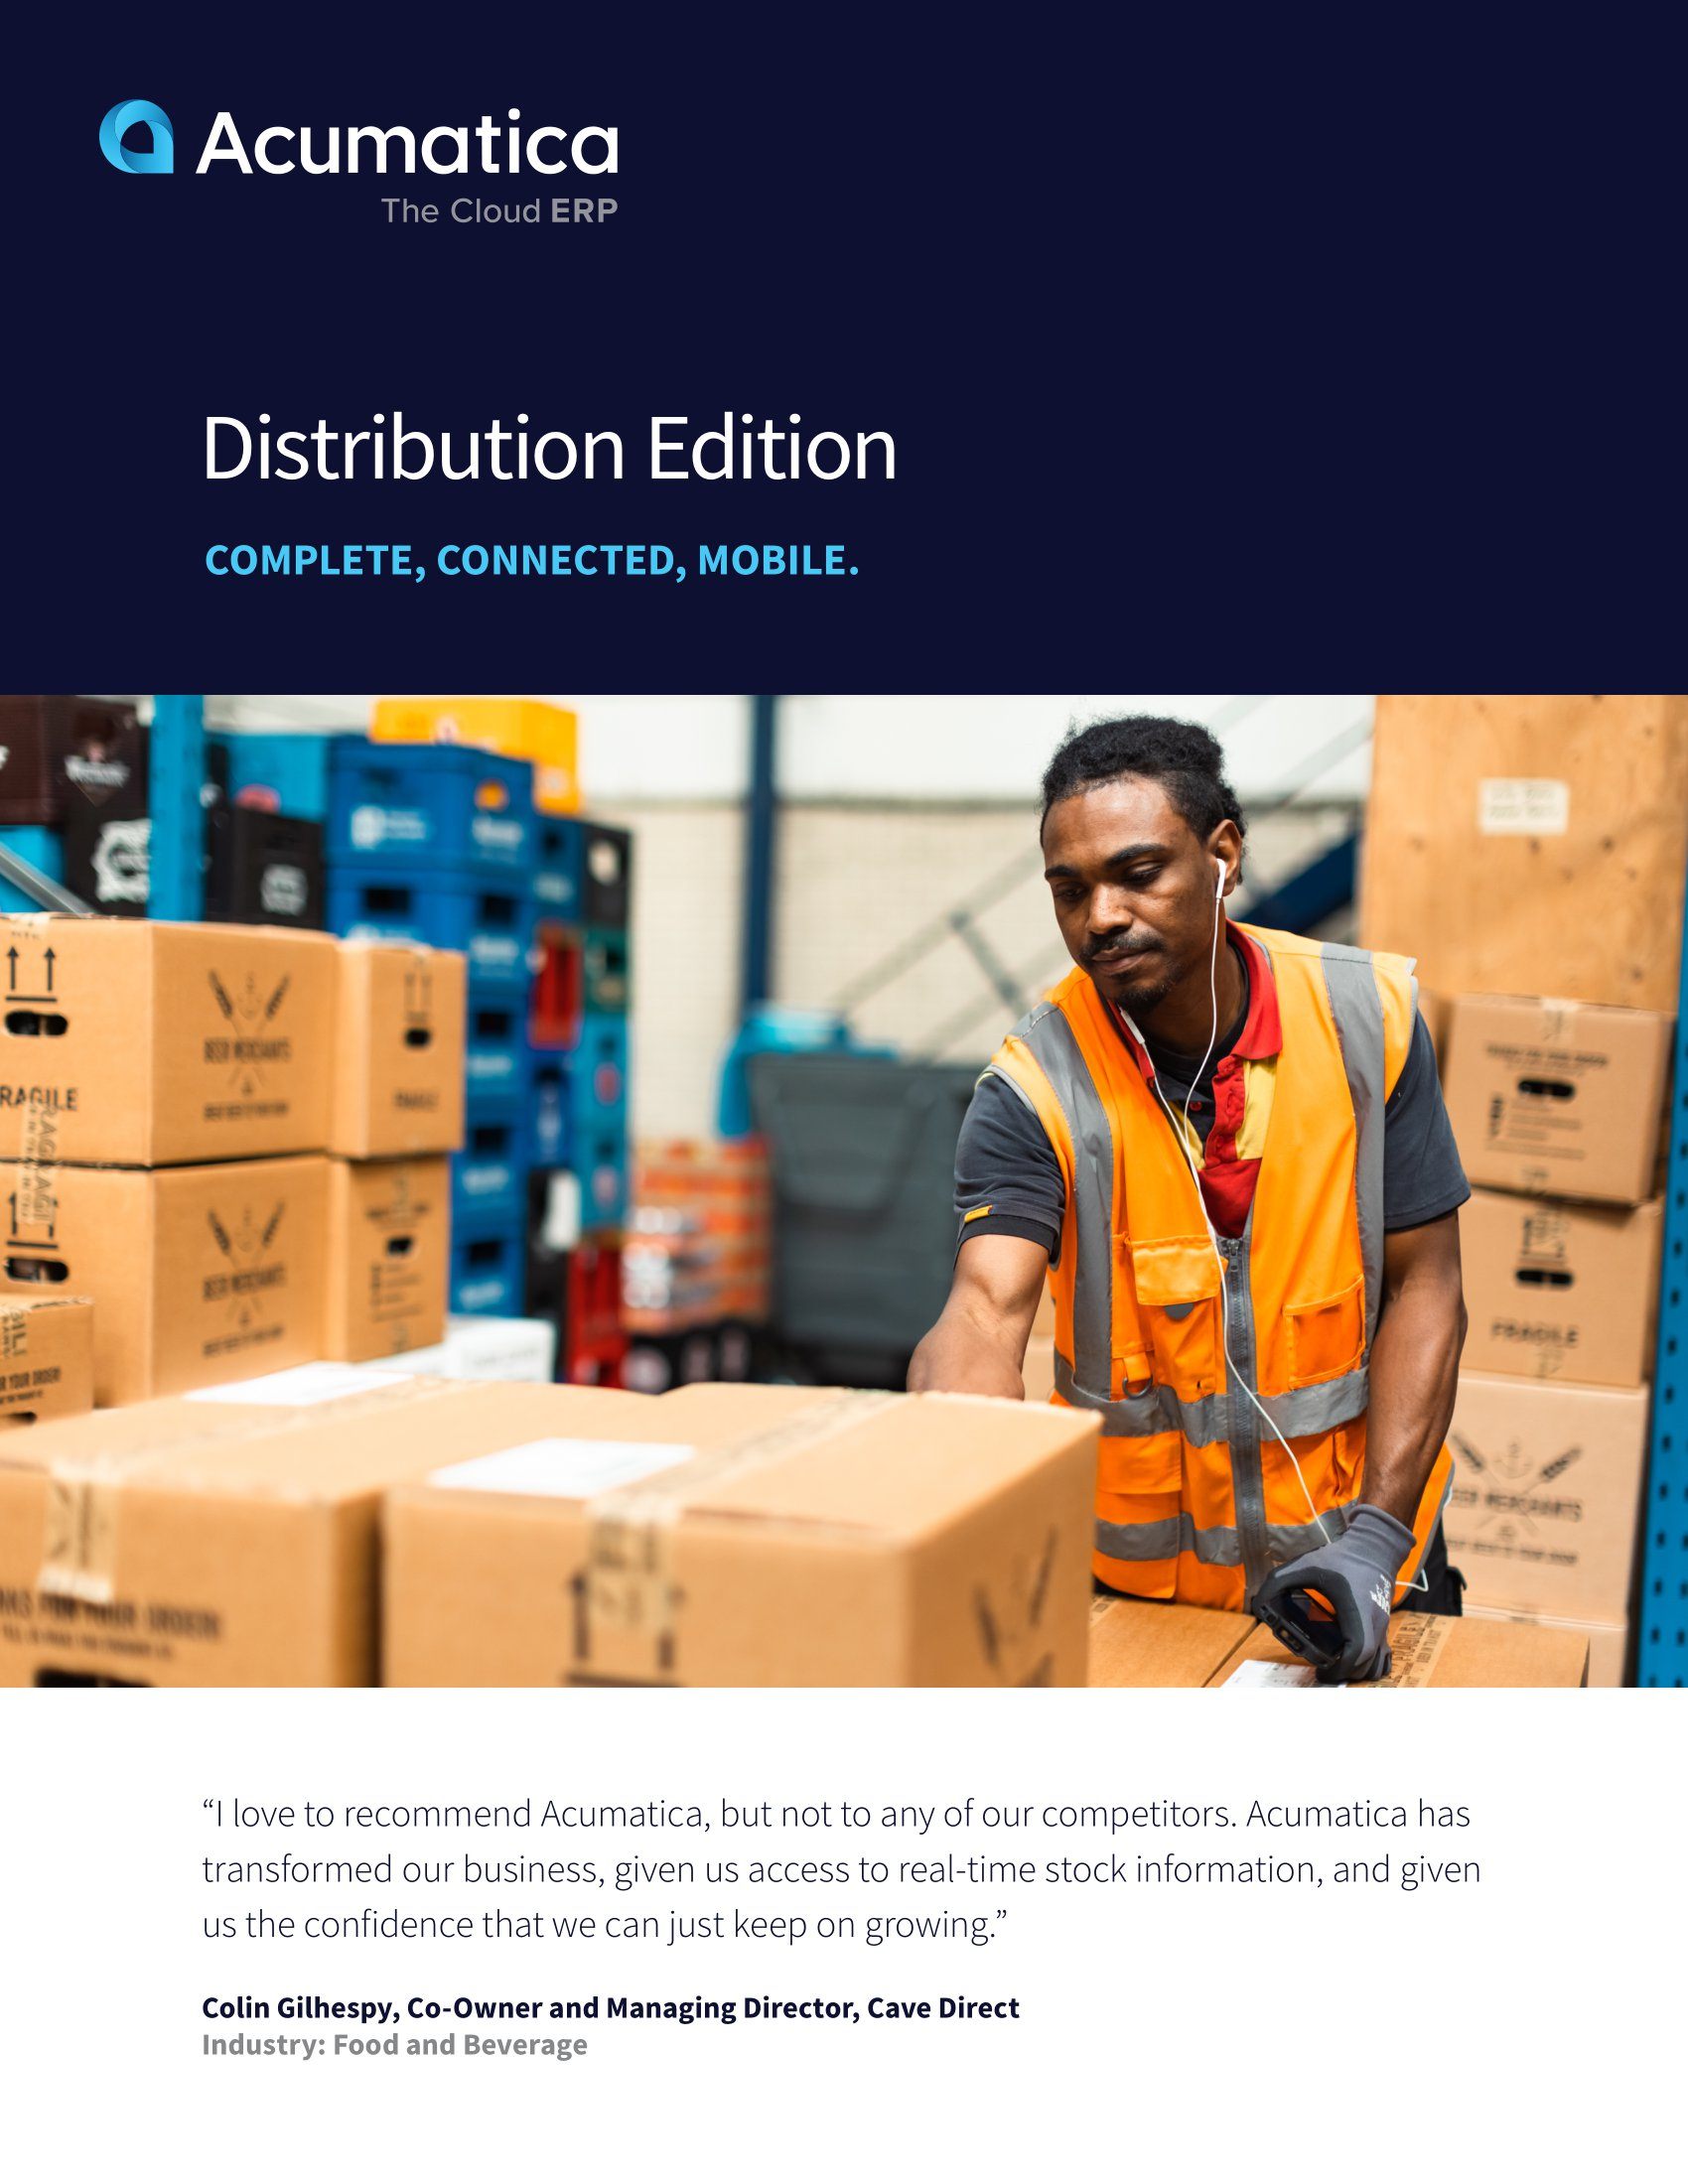 Distribution Edition: Complete, Connected, Mobile